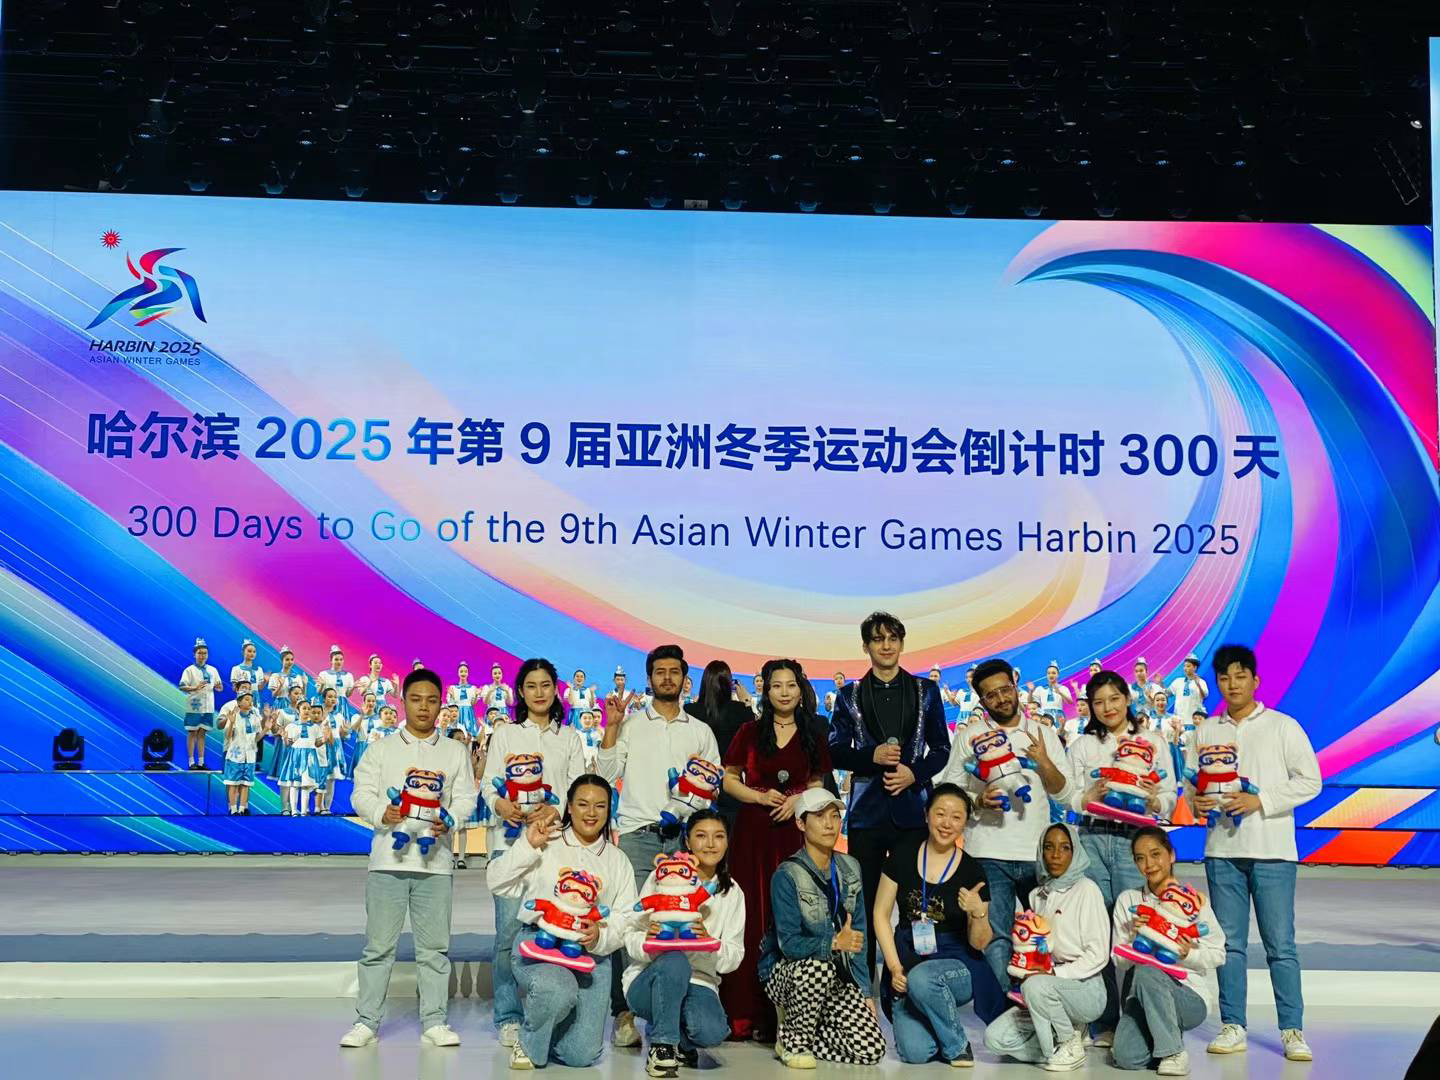 Pakistani Student Joins Chinese Champions in Singing “One Heart, One Dream” for the 9th Asian Winter Games Harbin 2025 Countdown